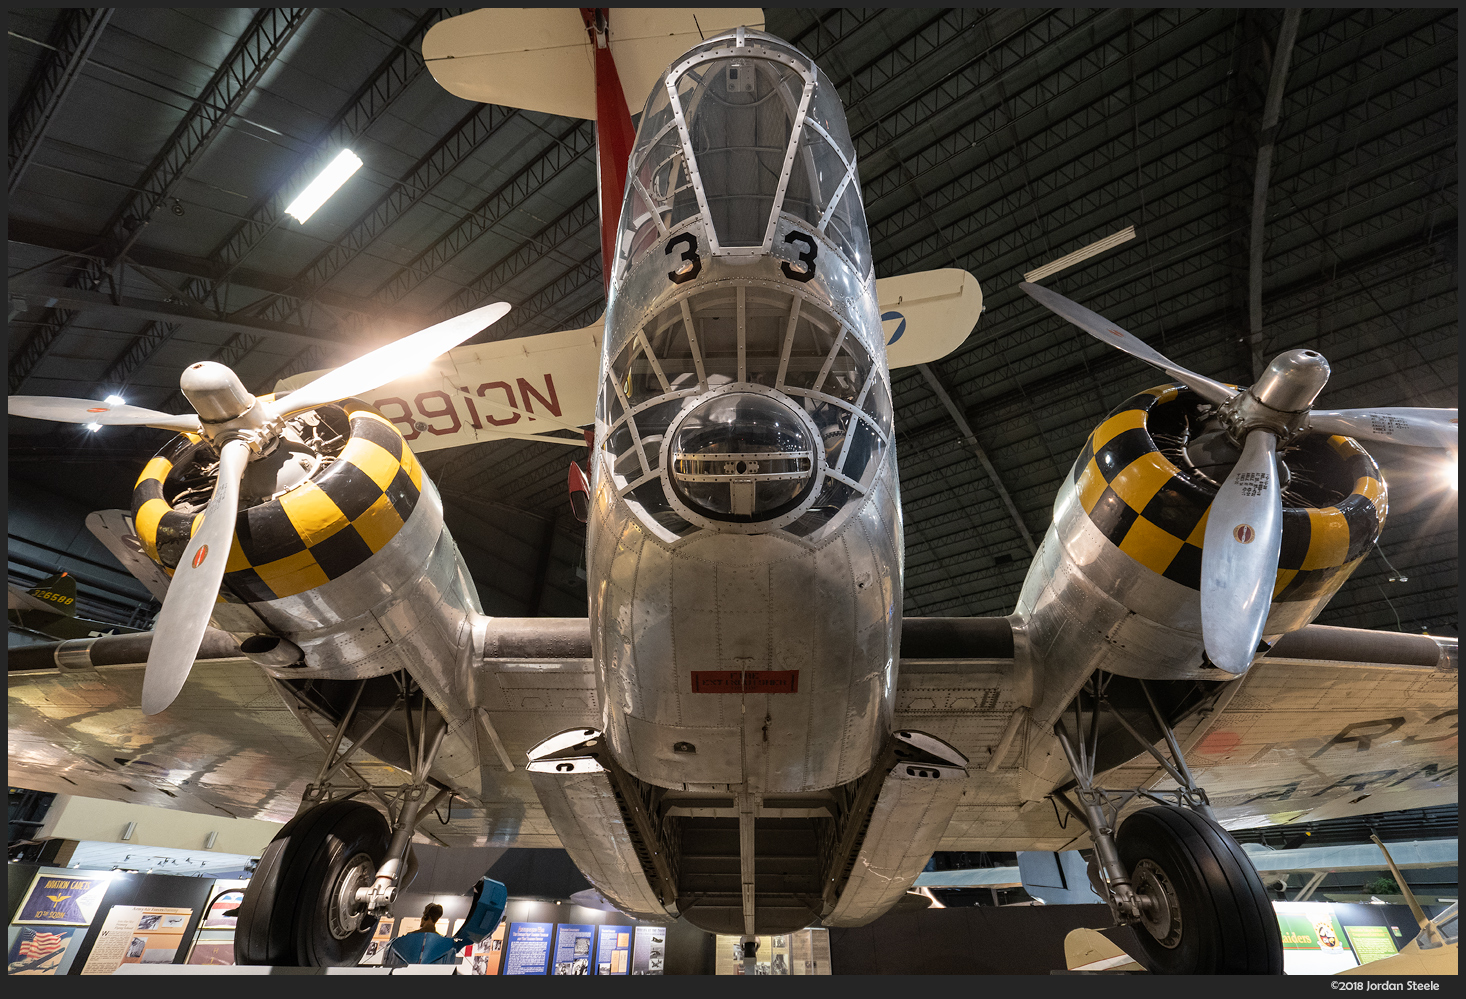 National Museum of the US Air Force - Sony A7 III With Sony FE 16-35mm f/4 ZA OSS @ 16mm, f/4, 